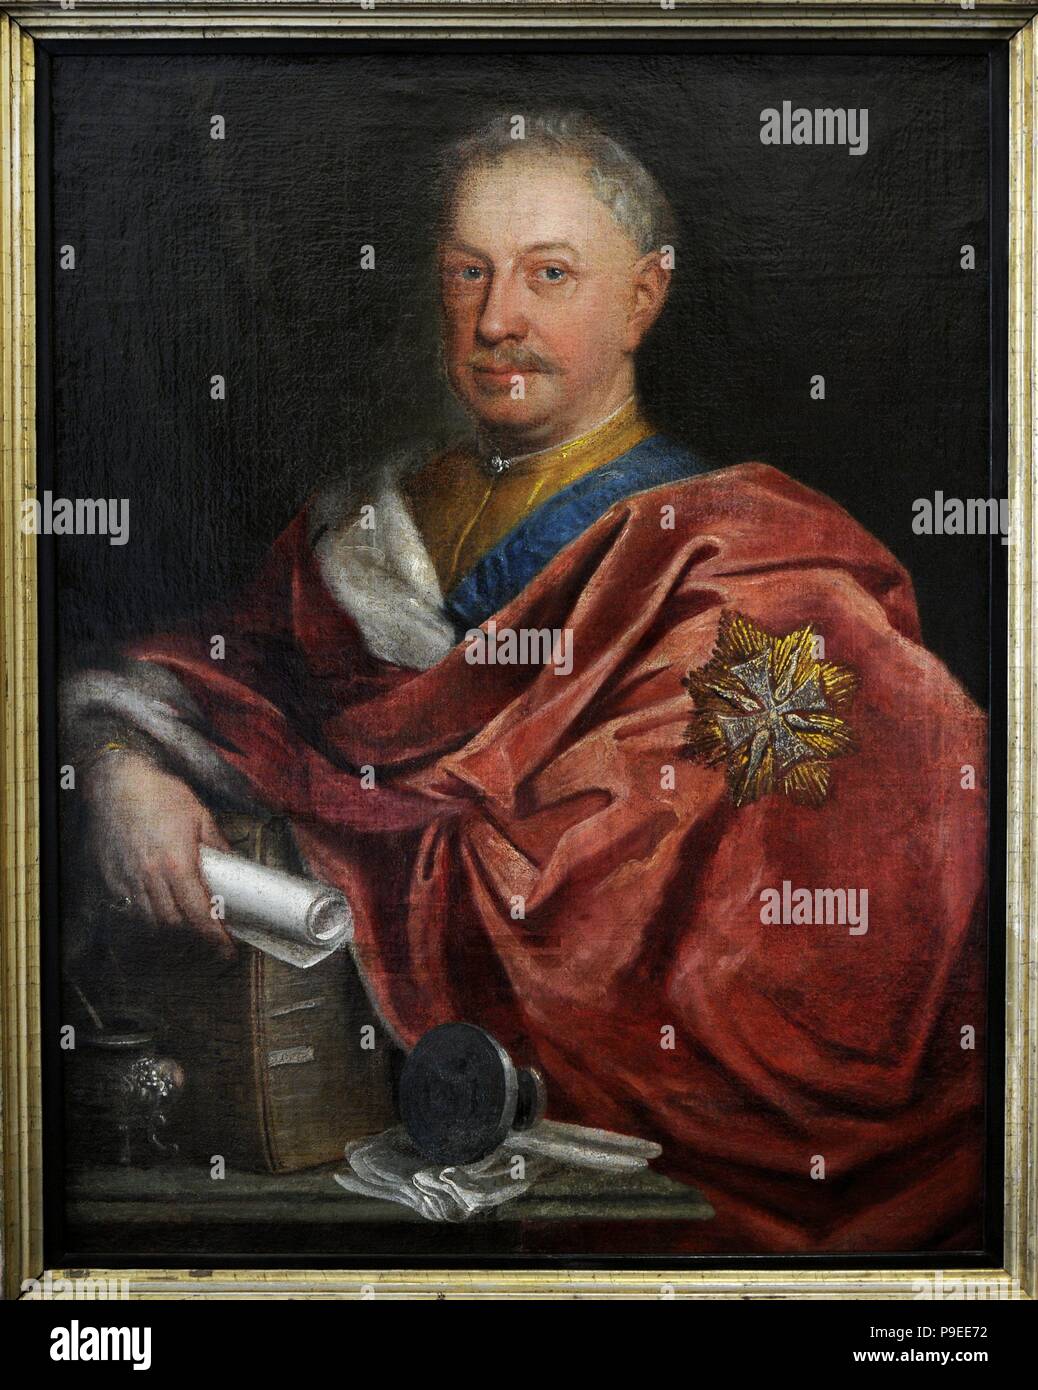 Jan Fryderyk Sapieha (1680-1751). Polish nobleman, Grand Recorder of Lithuania 1706-1716. The Castellan of Trakia and Gran Chancellor of Lithuania. Portrait. By painter Augustyn Mirys (1700-1790). Vilnius Picture Gallery. Lithuania. Stock Photo